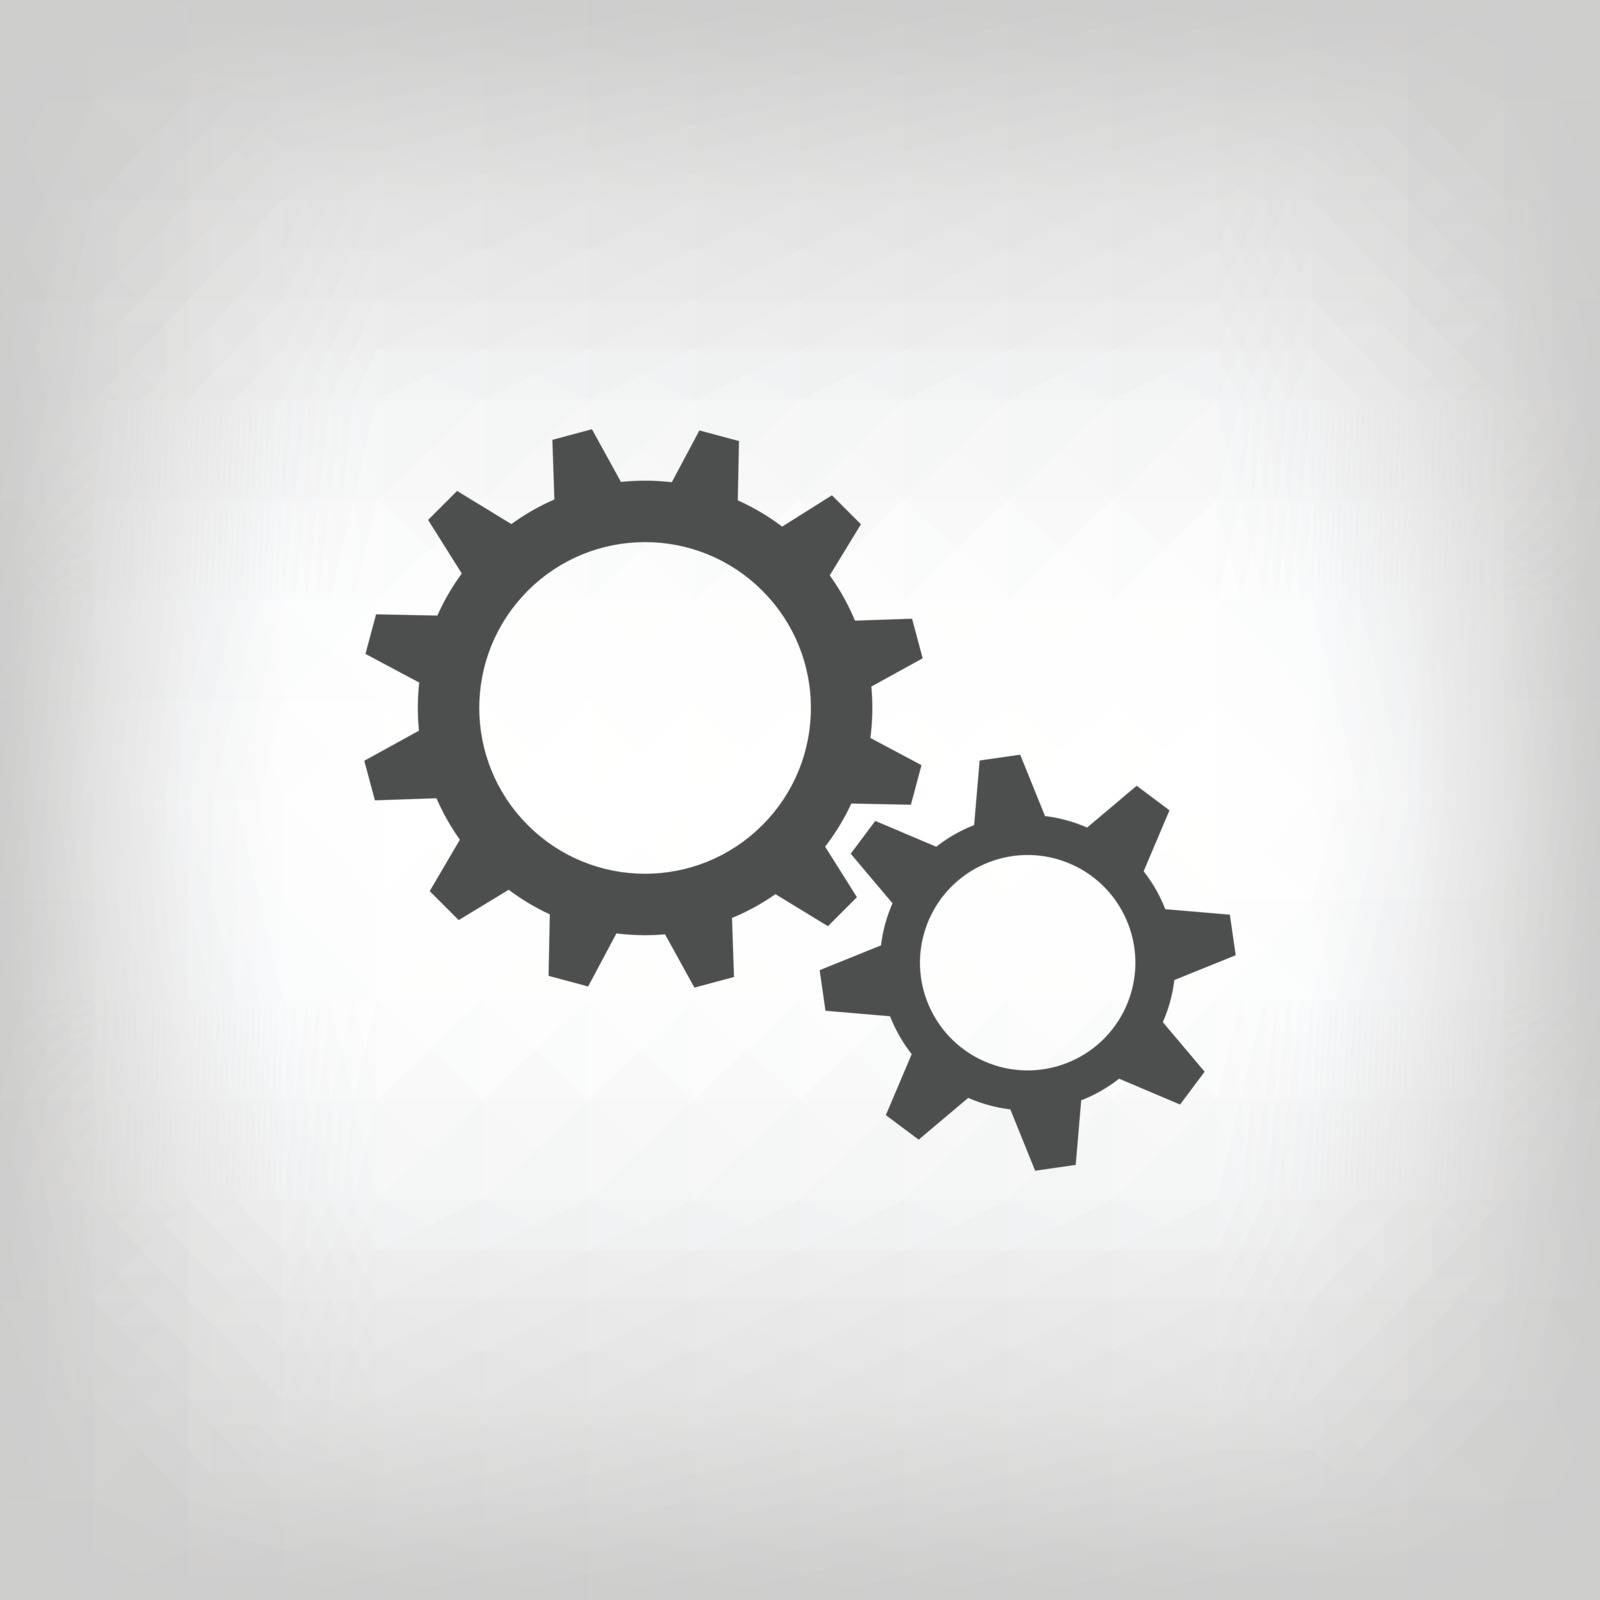 Simple illustration of two gear wheels in grey colors